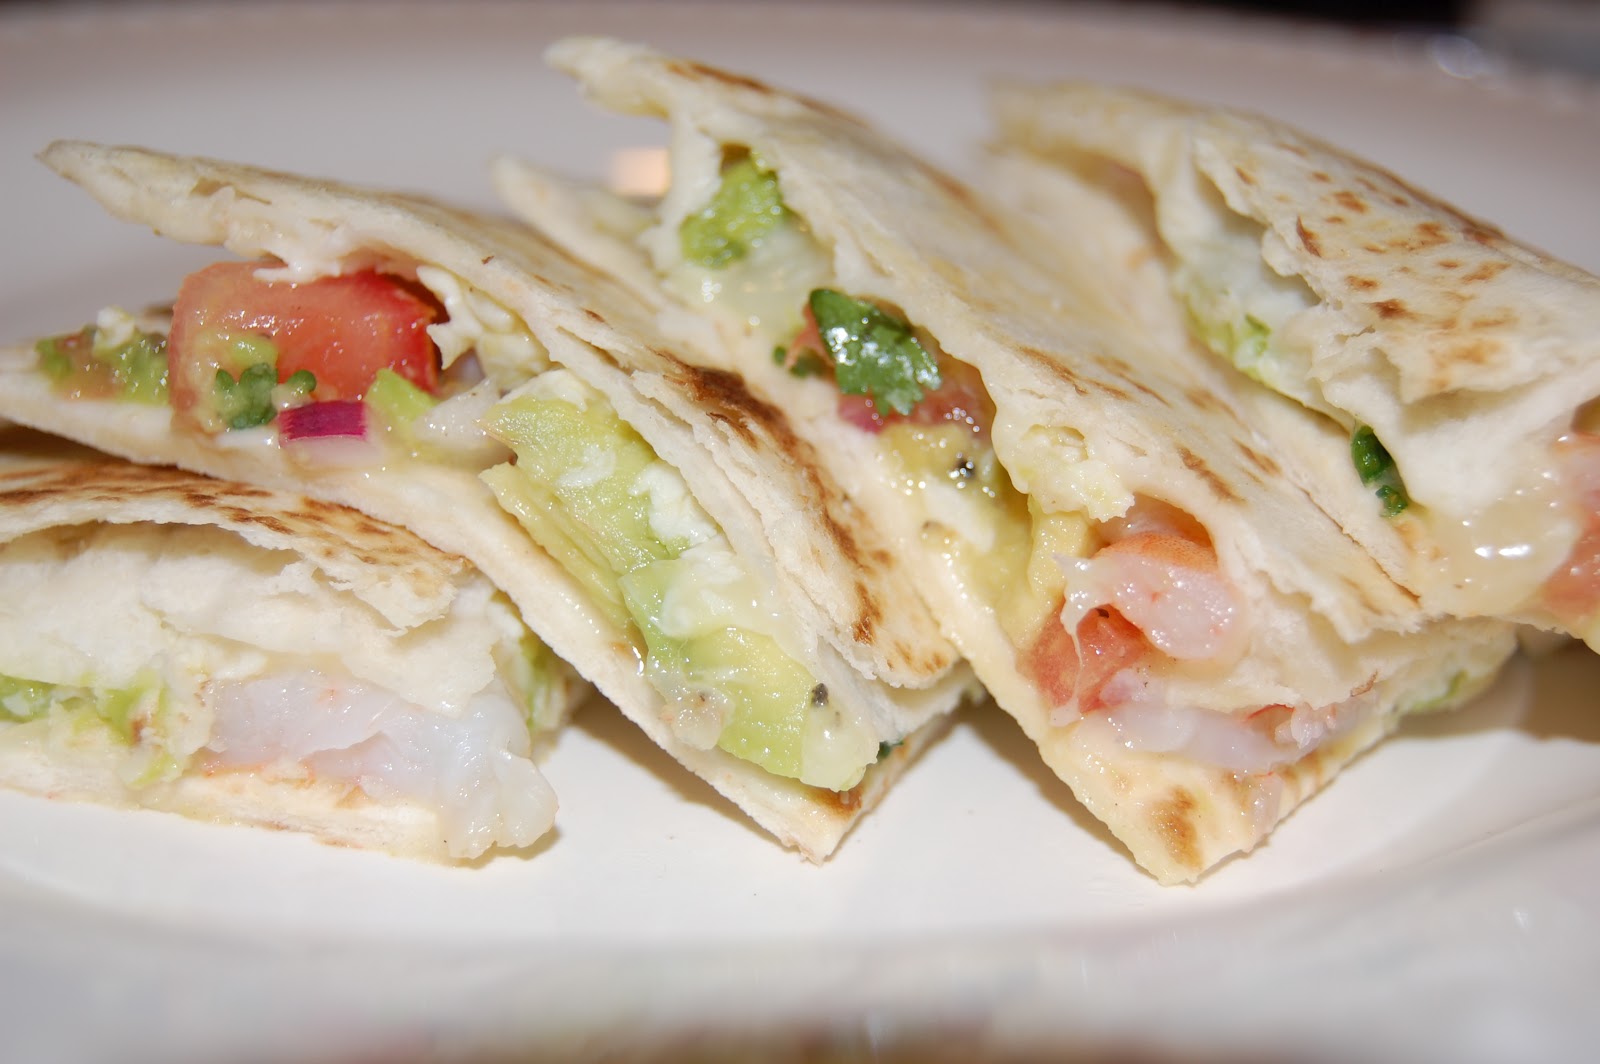 Dinner with The Donnells: Shrimp Quesadillas with Tomato Avocado Salsa